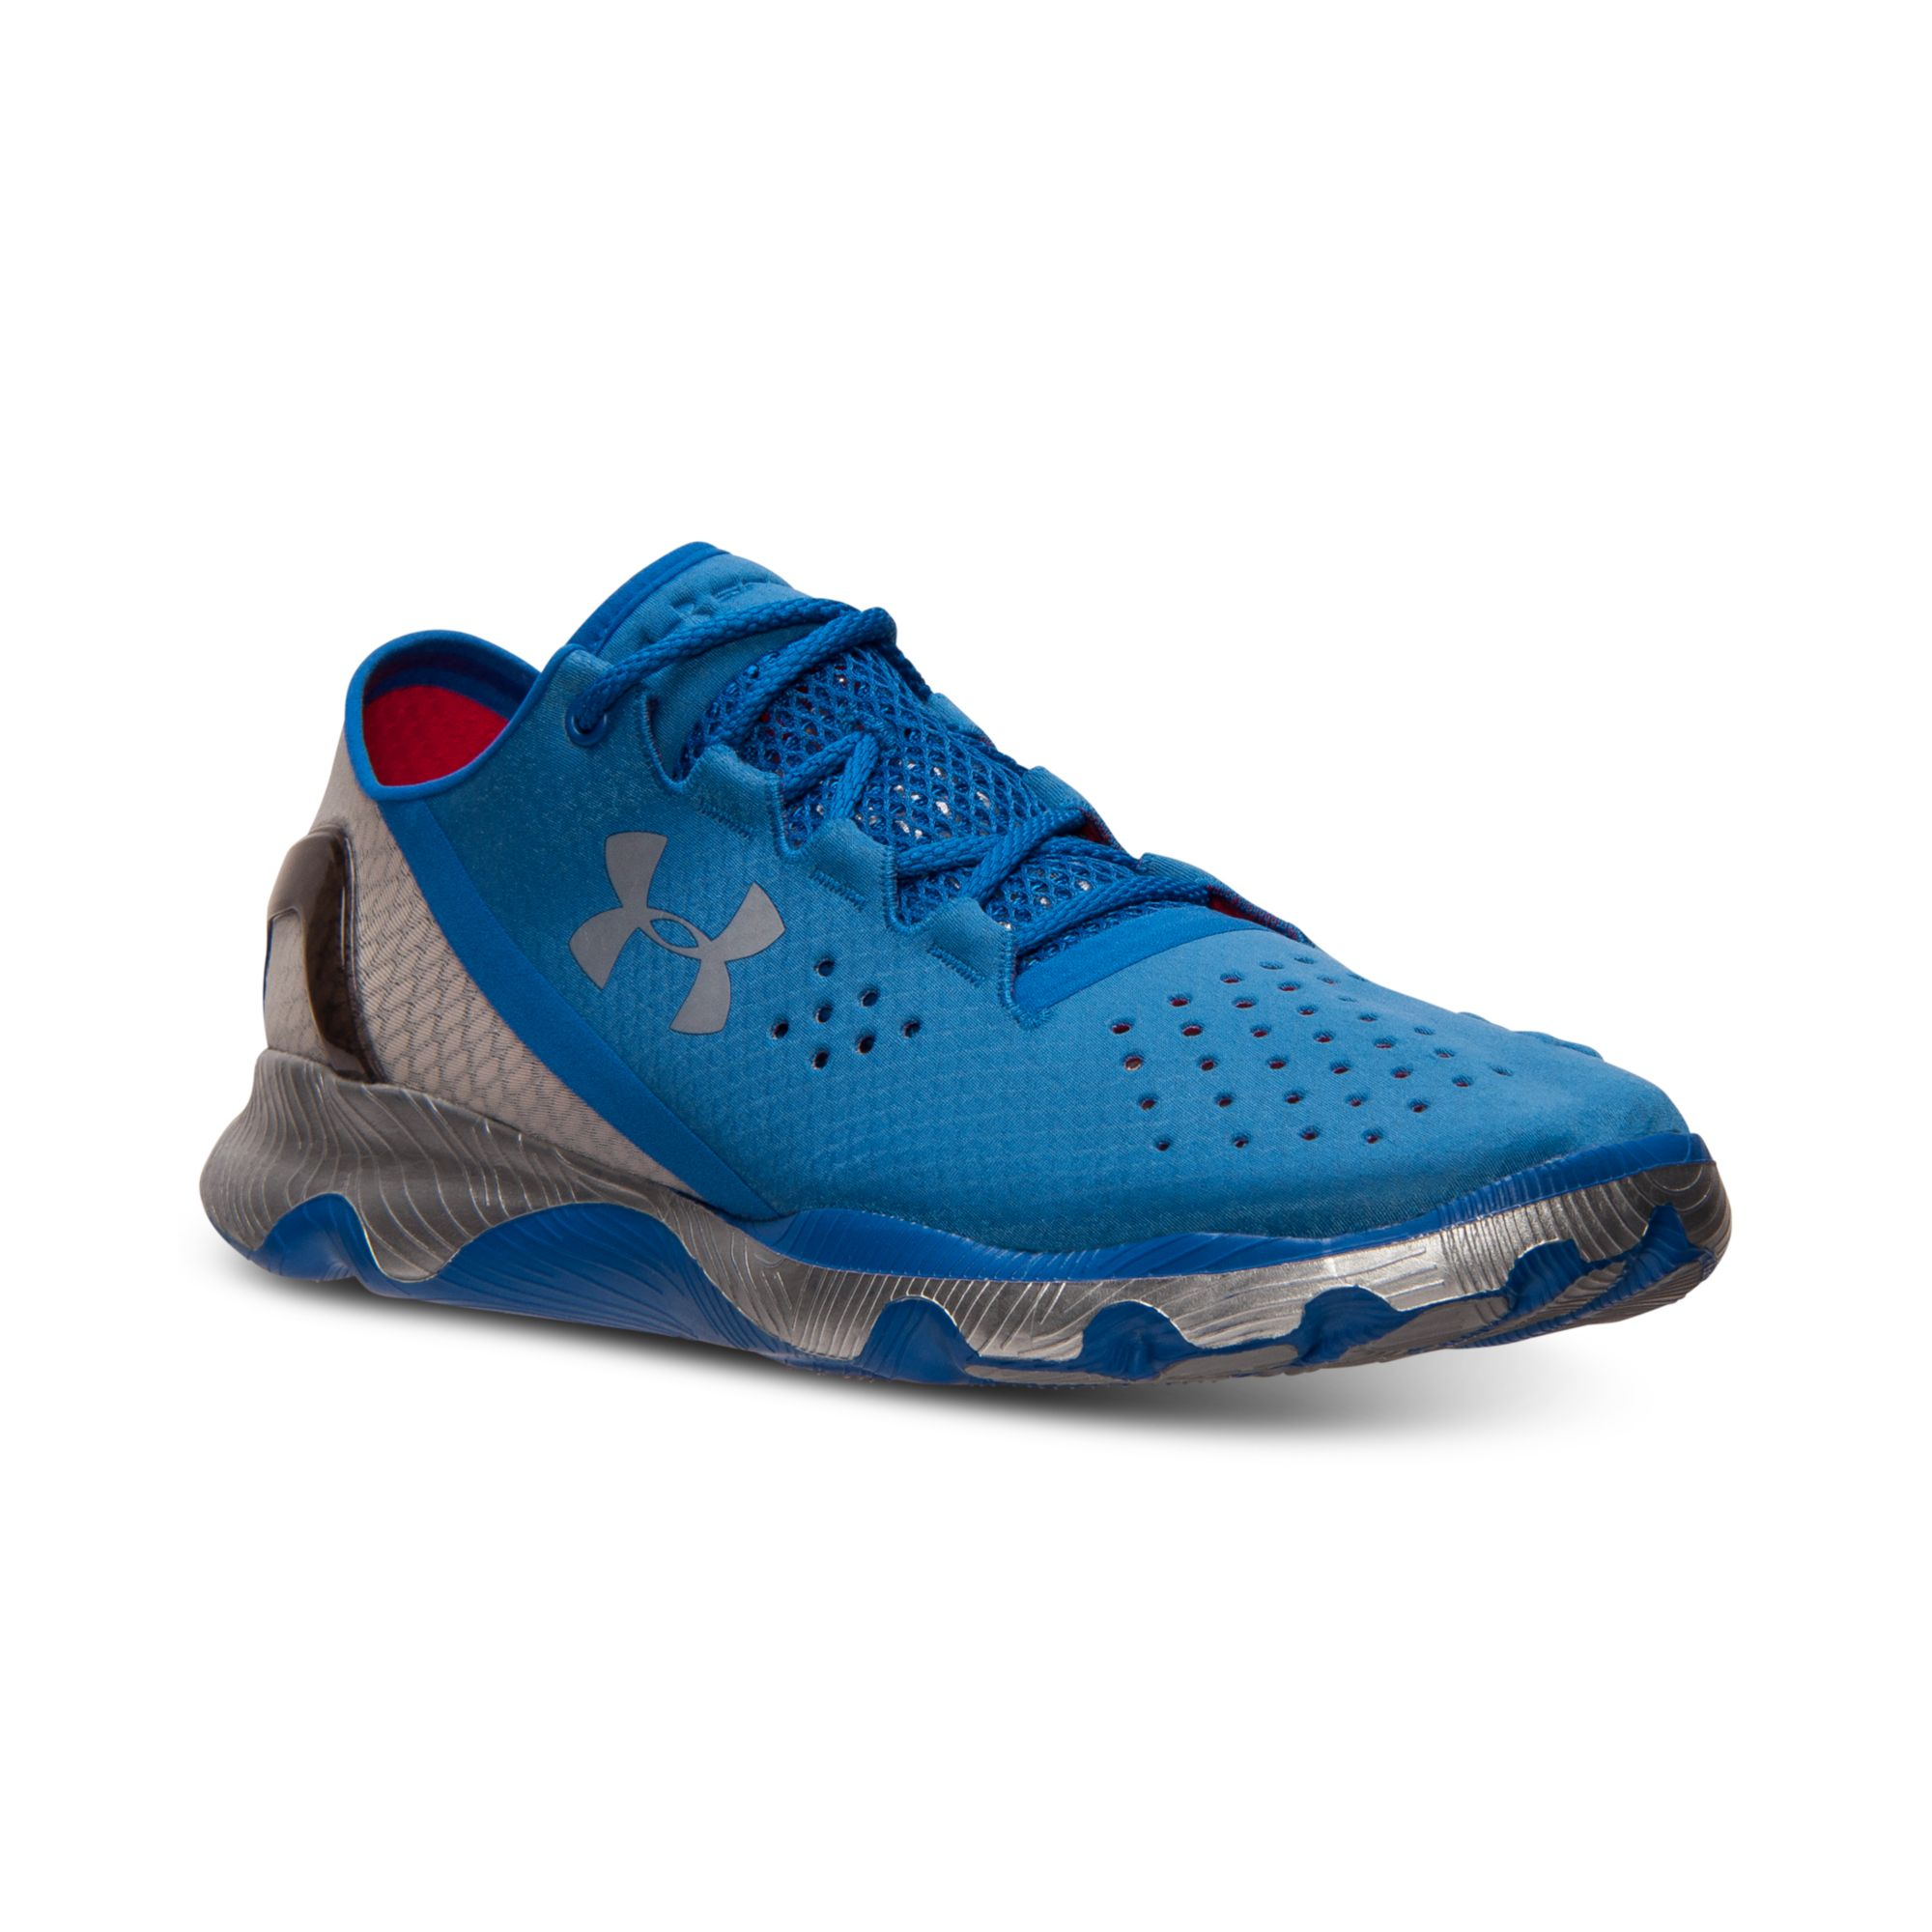 Lyst - Under Armour Mens Speedform Apollo Running Sneakers From Finish ...